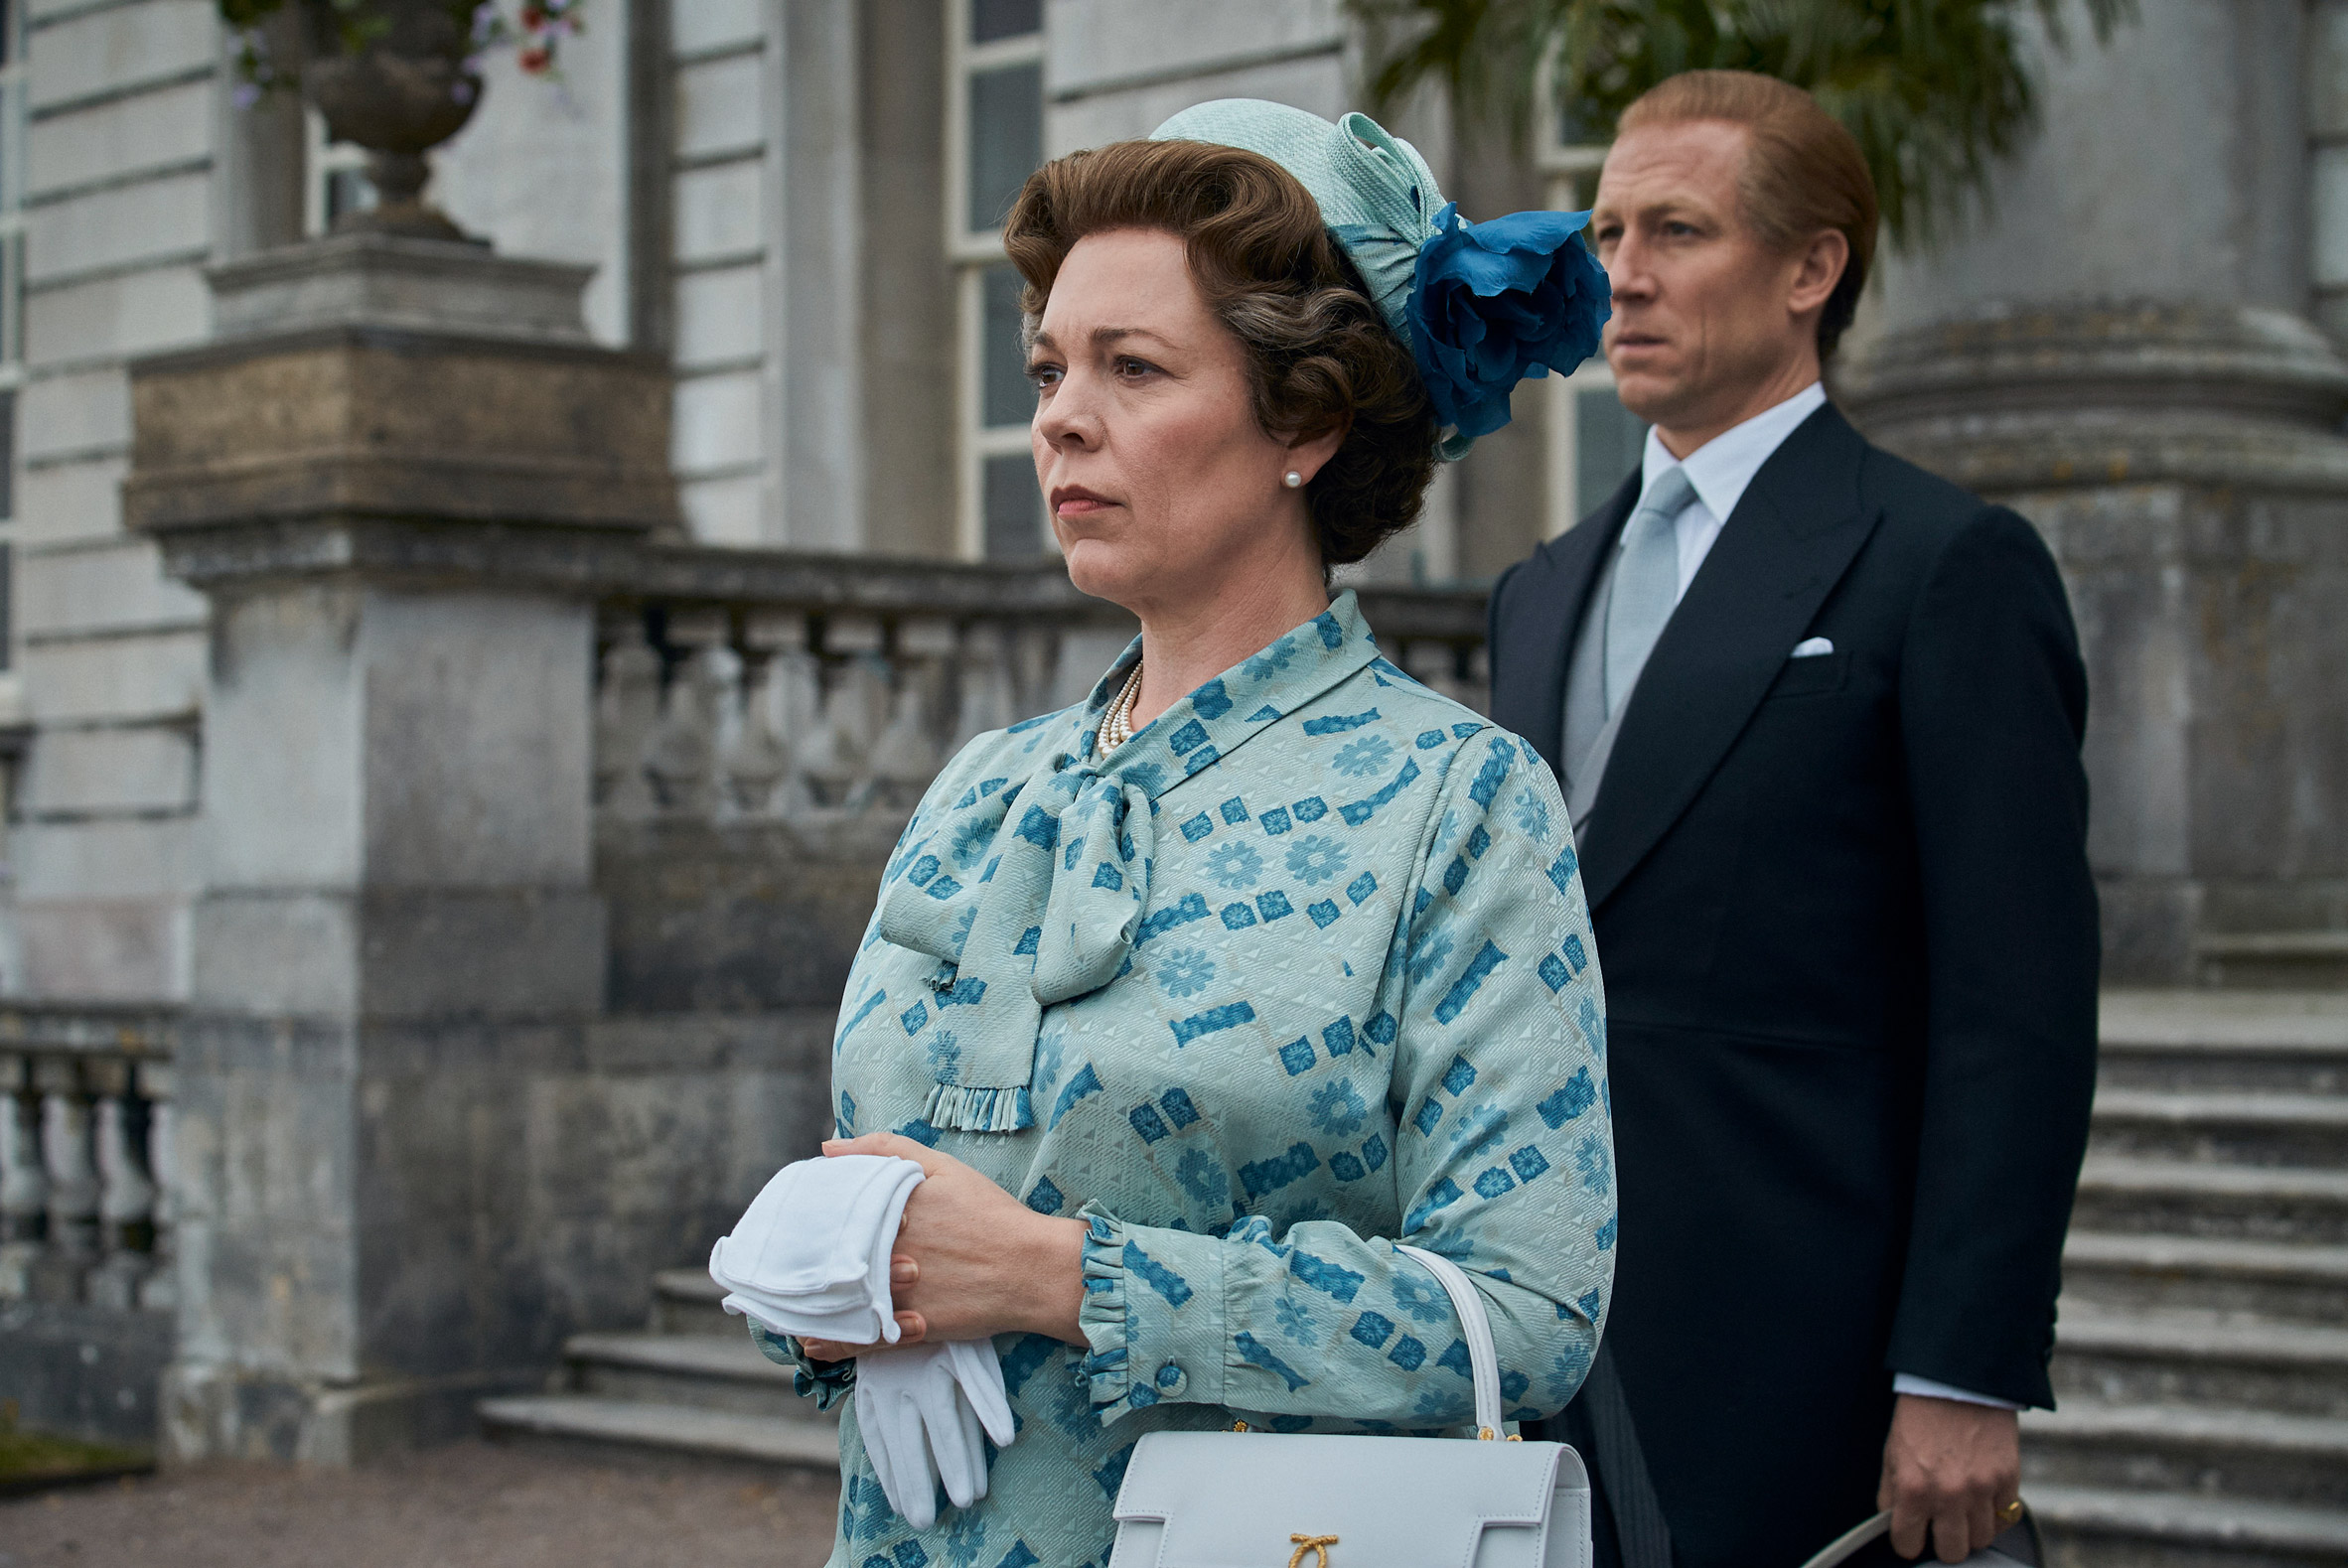 Olivia Coleman as the Queen and Tobias Menzies as Prince Philip in The Crown season 4